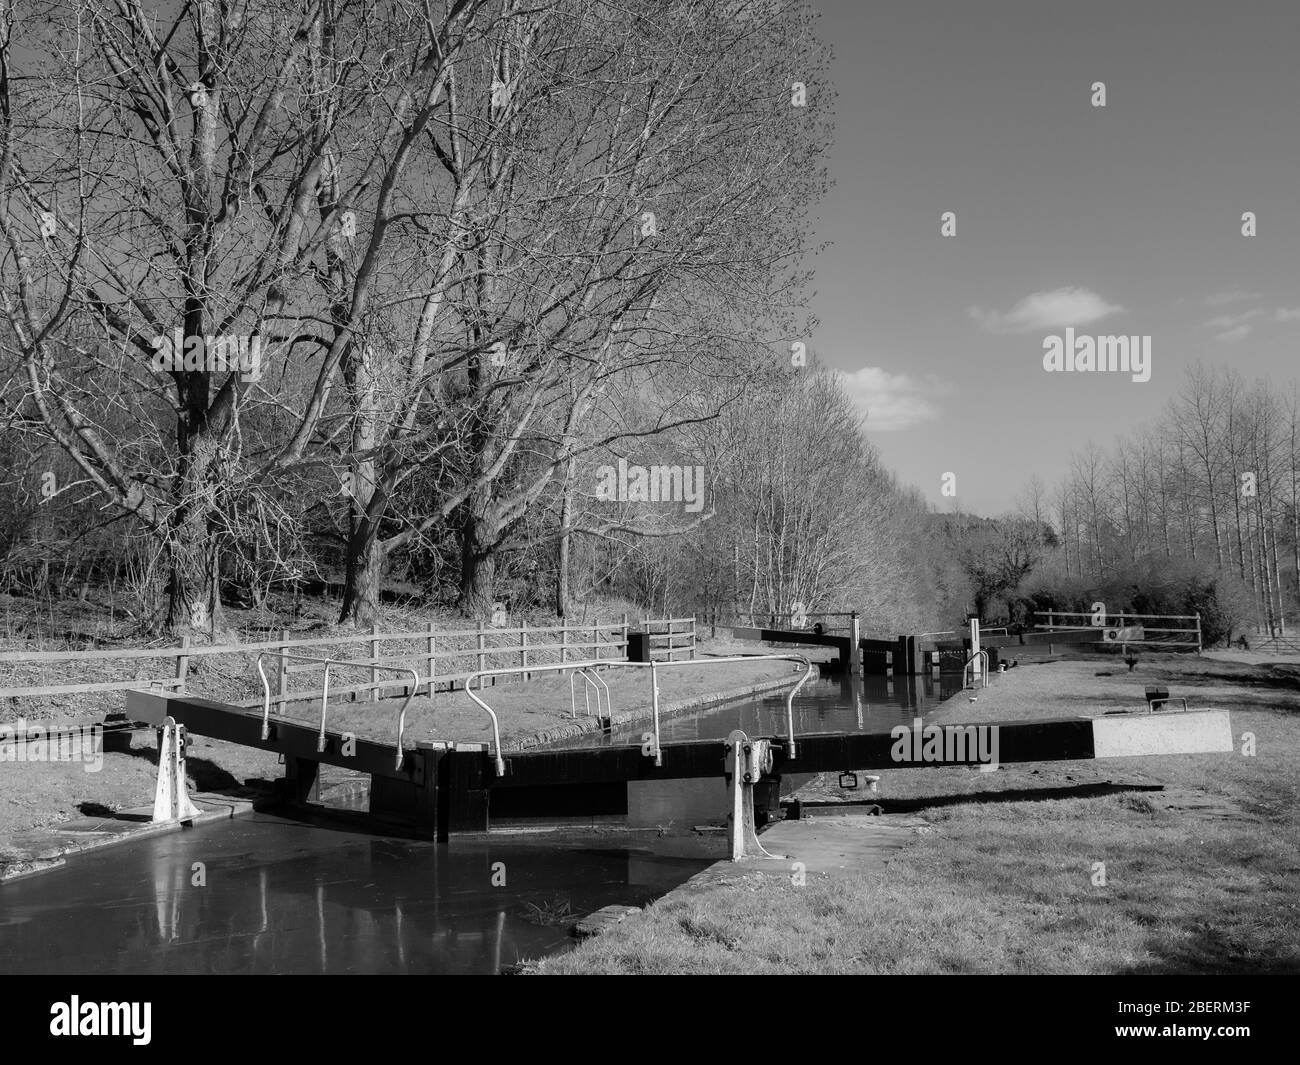 Black and White River Landscape, pour Field Middle Lock, Kennett et Avon Canal, Wiltshire, Angleterre, Royaume-Uni, GB. Banque D'Images